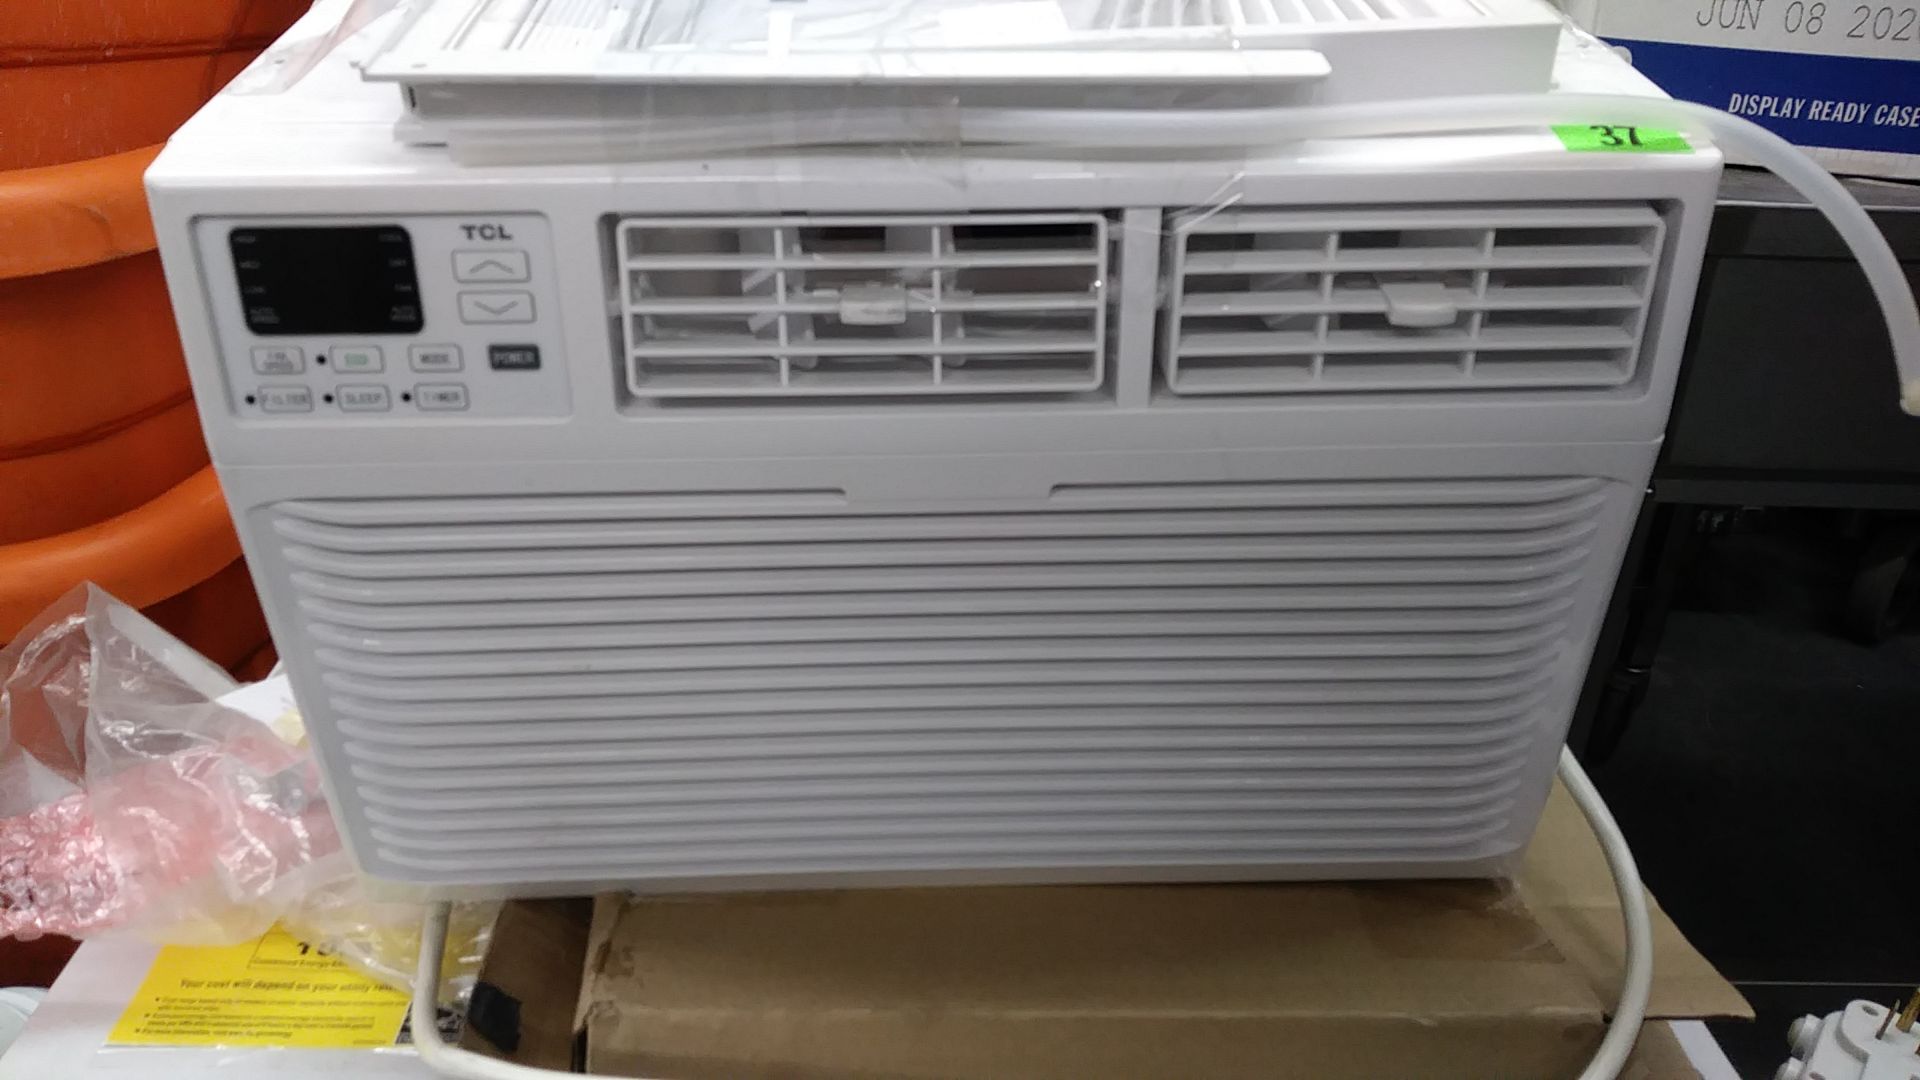 TCL WINDOW AIR CONDITIONER (TAW08CR19) (APPROX 19" W x 13" H x 15" D)